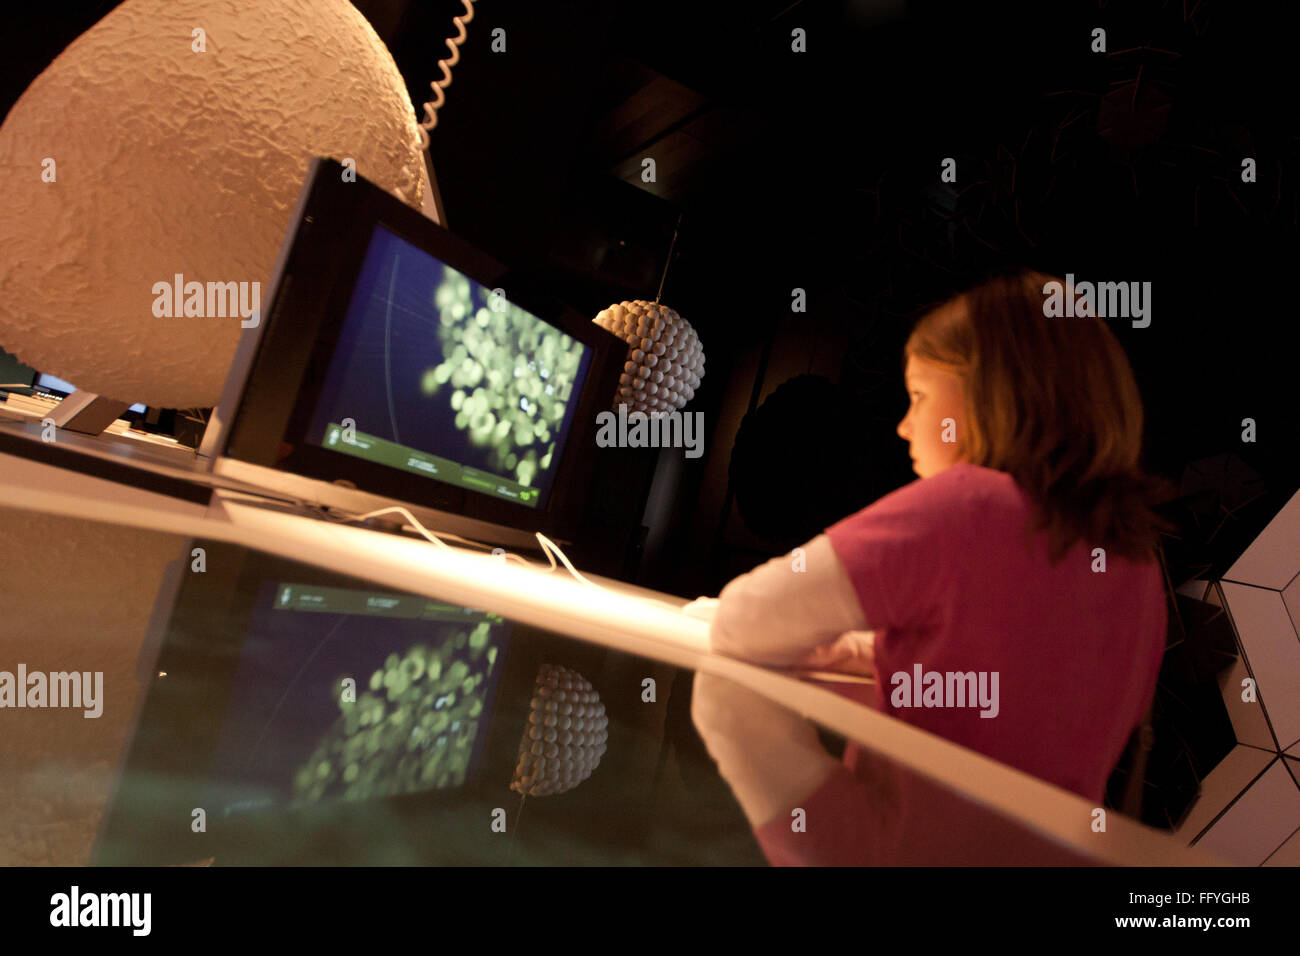 Tile Image Of Girl Using Computer At Science Museum Stock Photo